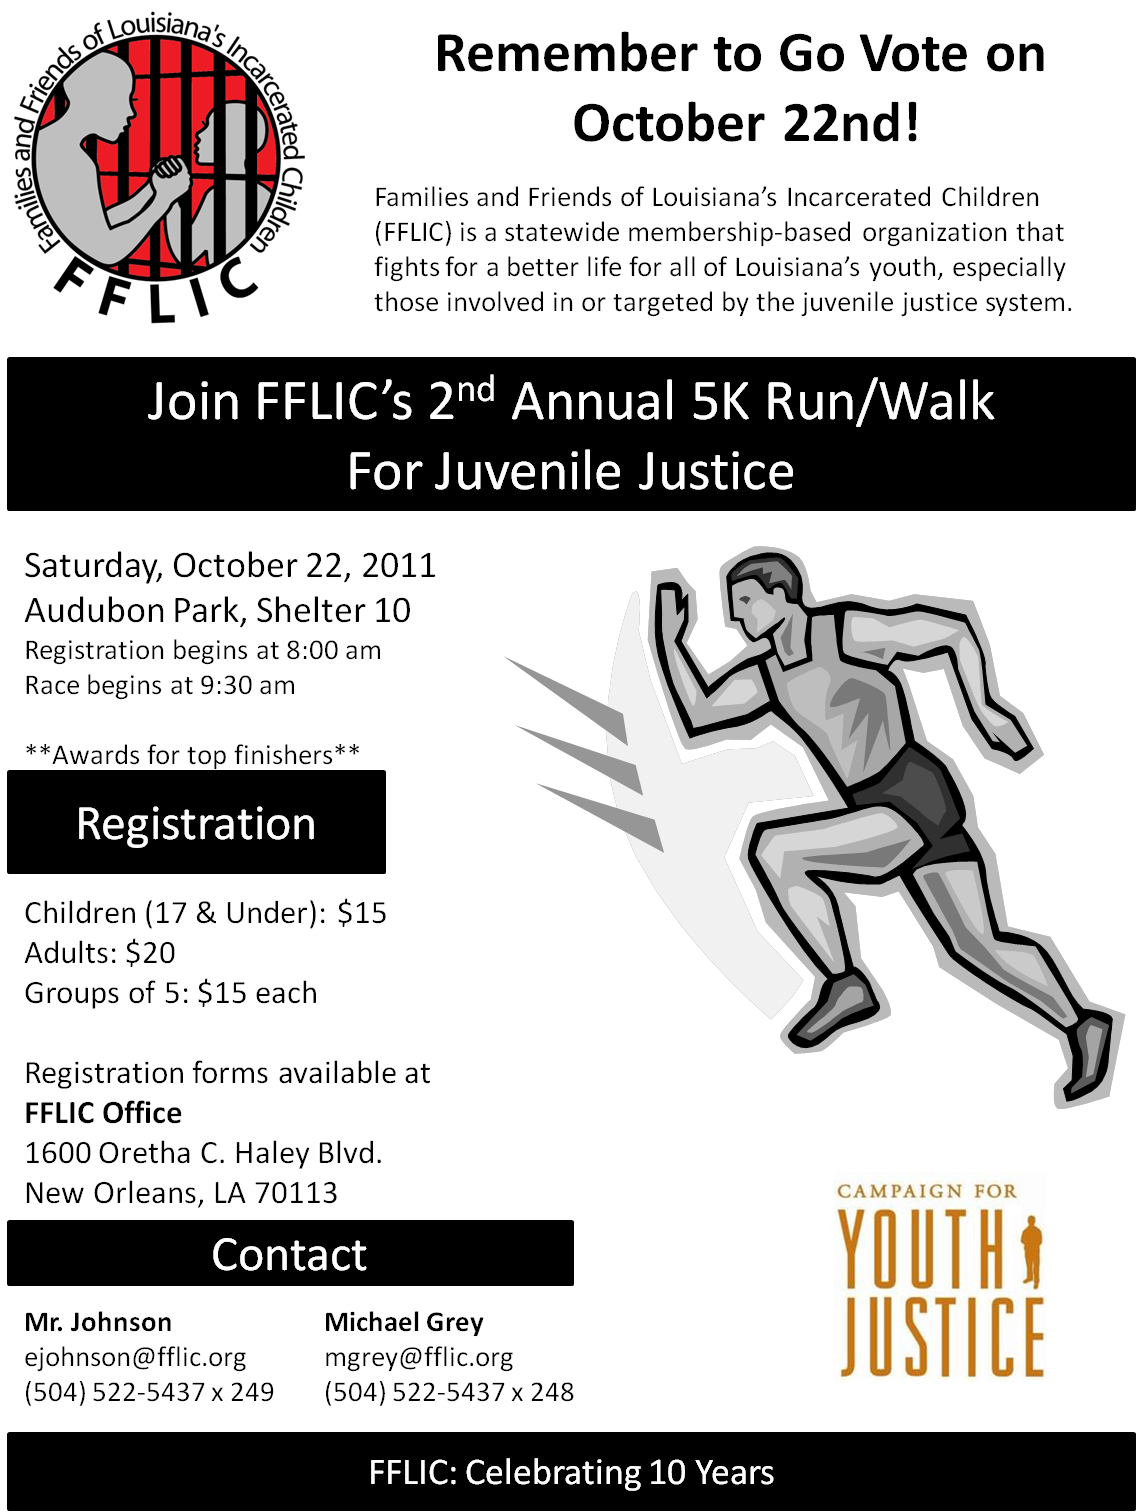 FFLIC’s 2nd Annual 5K Run/Walk for Juvenile Justice